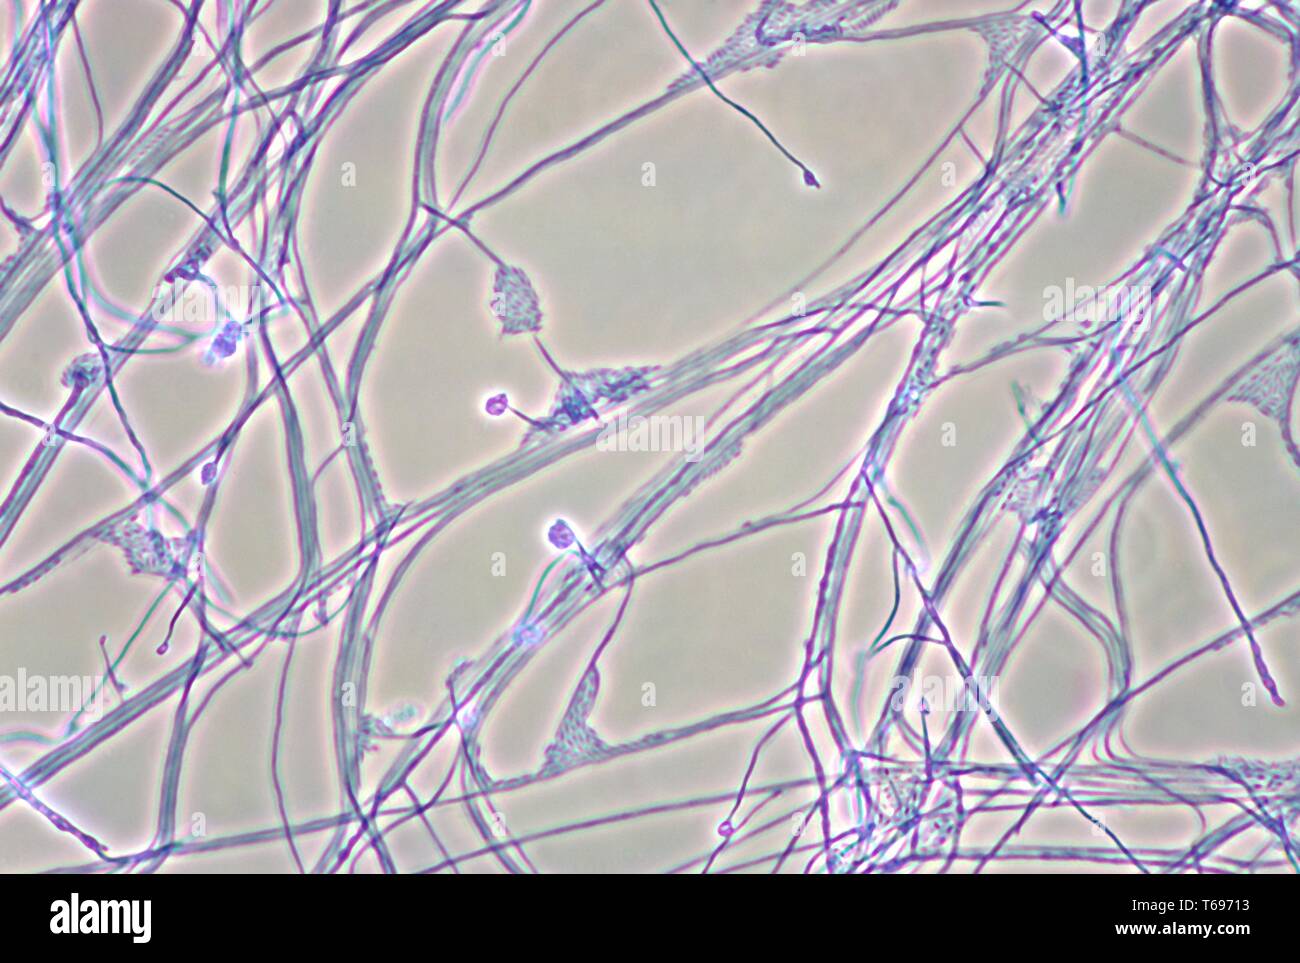 Photomicrograph of the mycelia, conidiophores, and conidia of the fungus Acremonium recifei, 1978. Image courtesy Centers for Disease Control and Prevention (CDC) / Dr Arvind A. Padhye. () Stock Photo